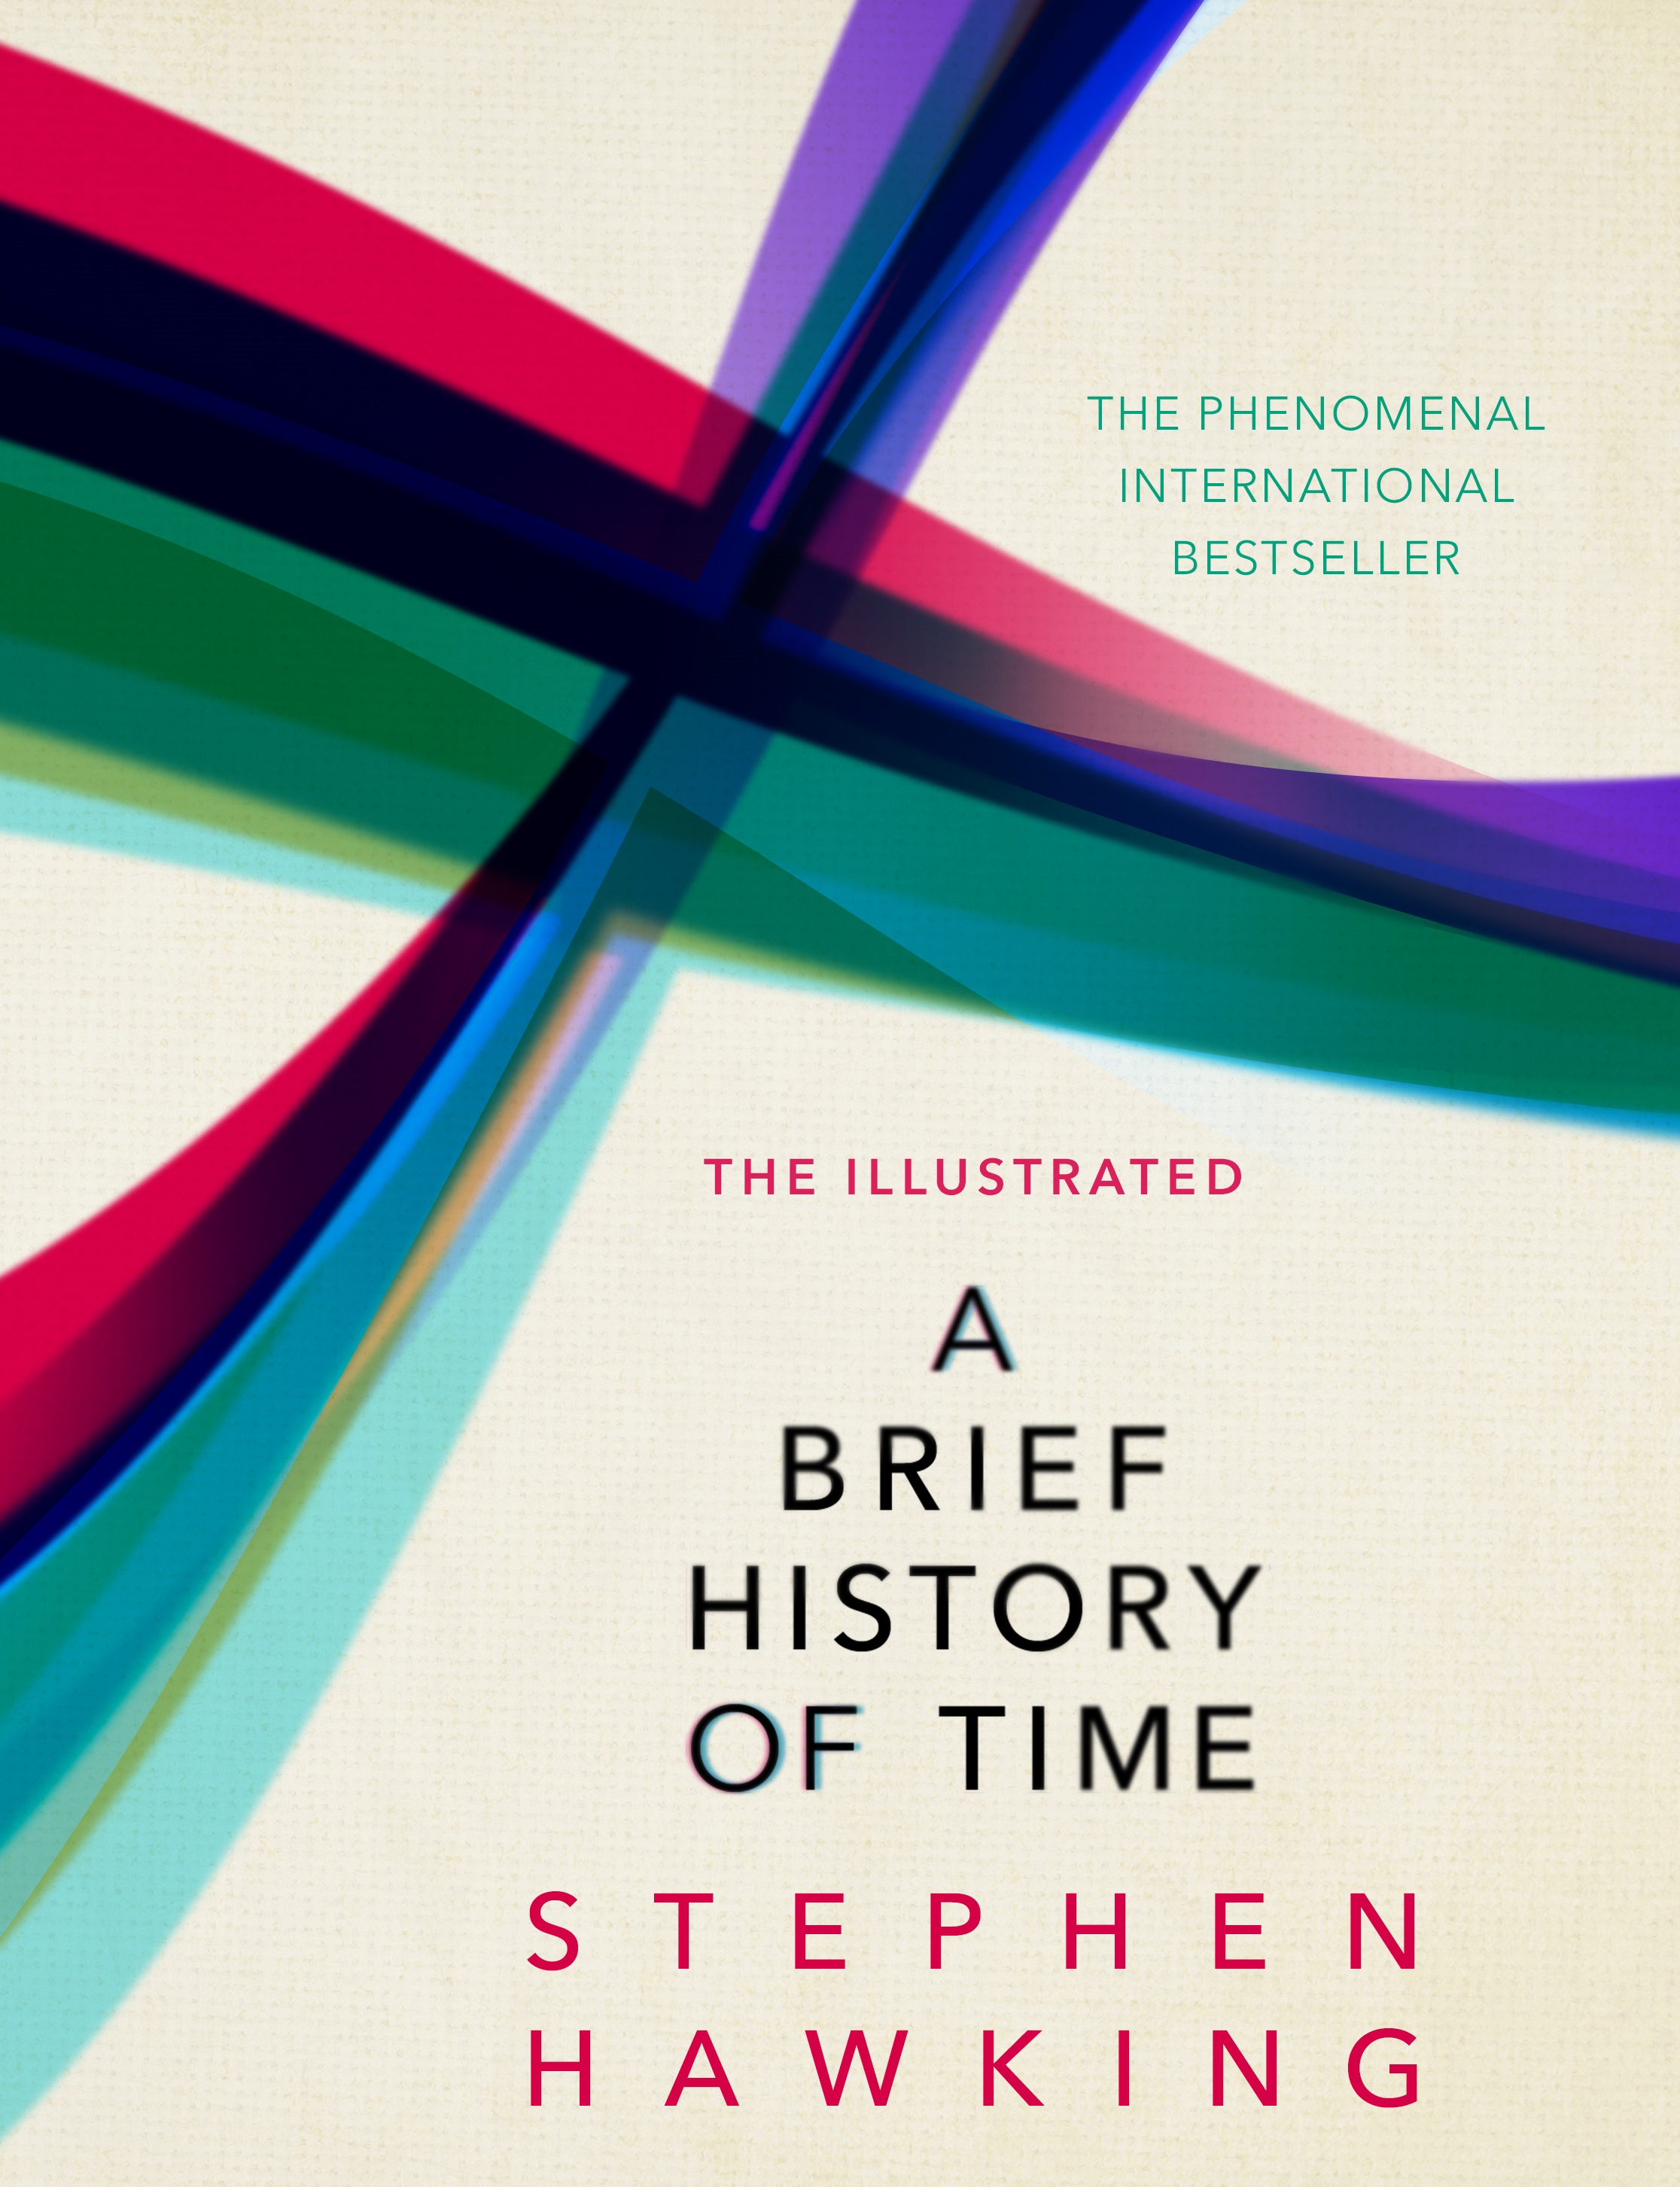 the illustrated a brief history of time download